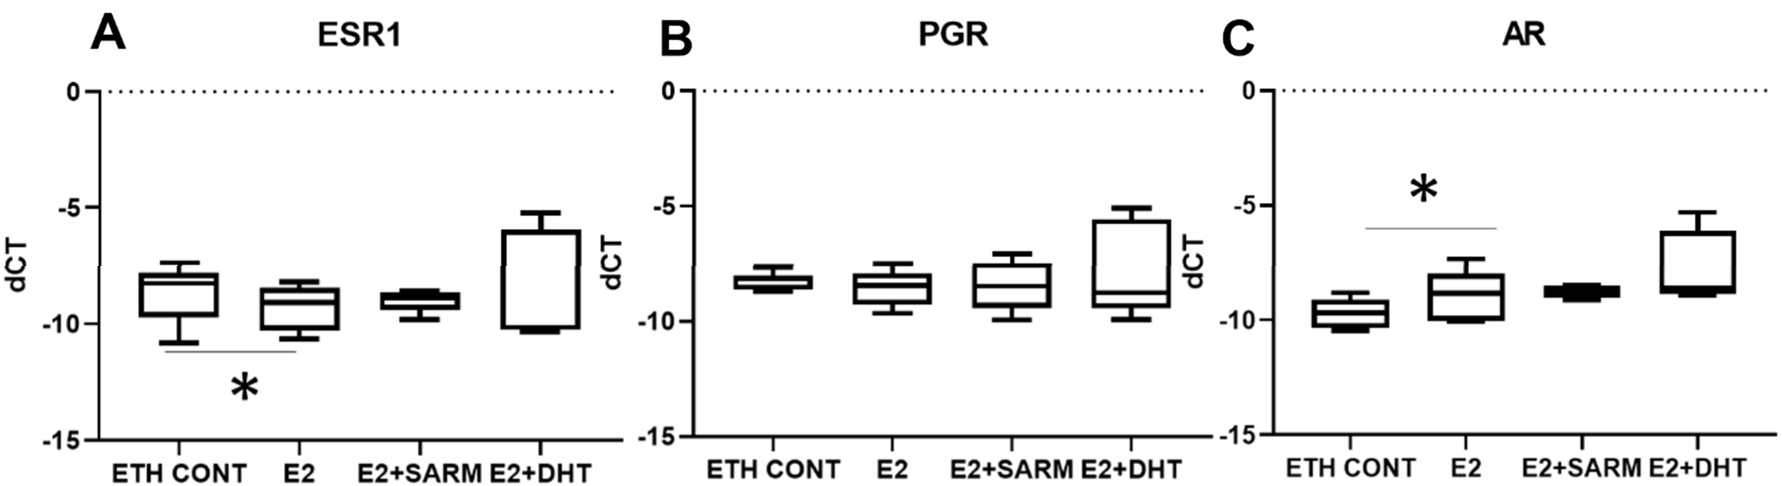 Hormonal receptor mRNA expression level in treated explants. CT values from RT-qPCR were normalised with L32, with delta-CT shown. A Expression levels of ESR1. B Expression levels of PGR. C Expression levels of AR. Student’s paired T-test was used to determine significance, ∗ denotes p<0.05.